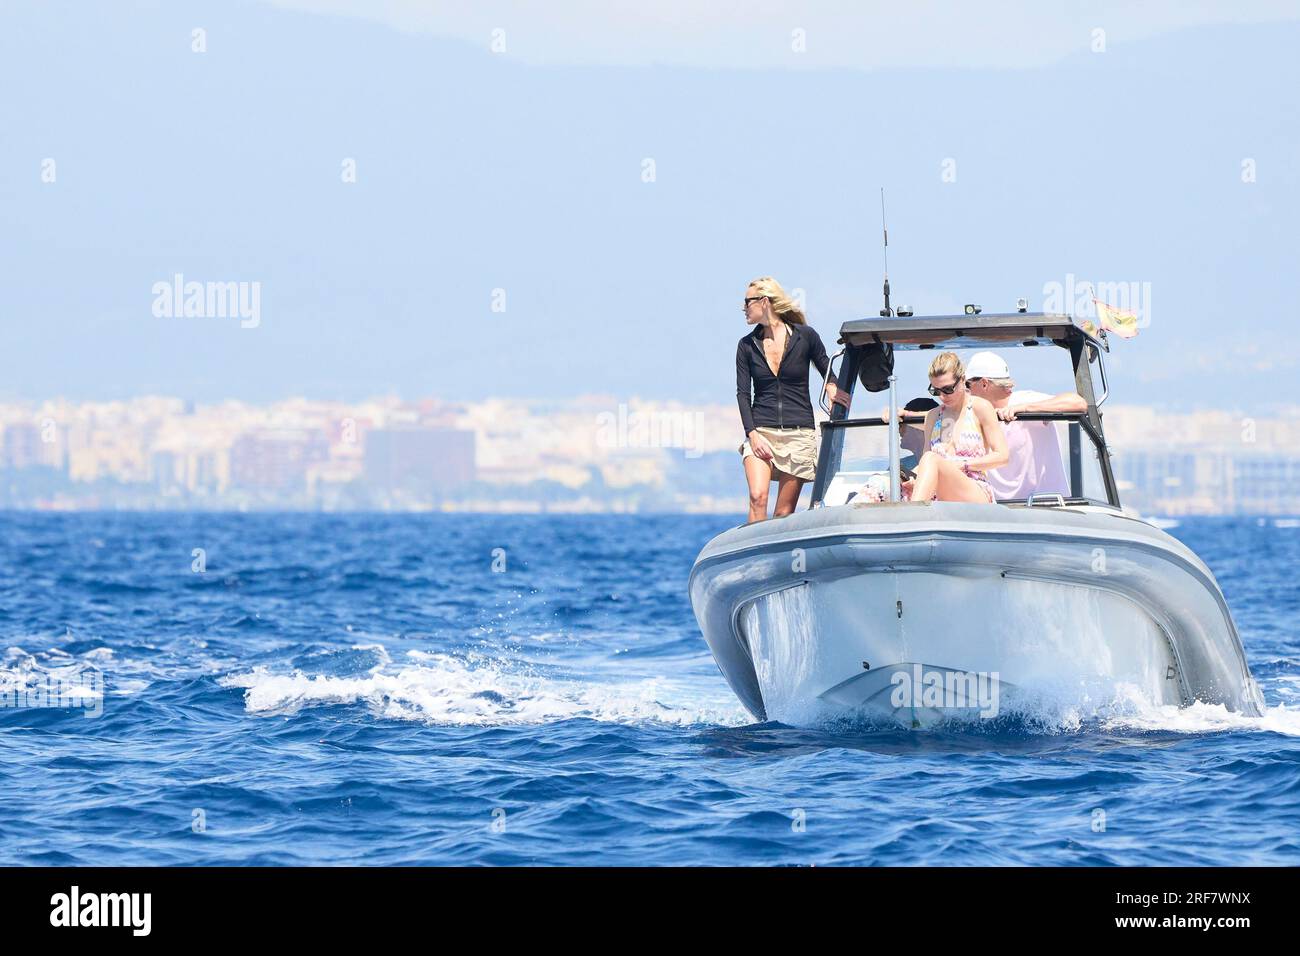 Palma. Spain. 20230801,  Carlos Moya, Carolina Cerezuela on board of a private boat during 41st Copa del Rey Mapfre Sailing Cup - Day 2 on August 1, 2023 in Palma, Spain Stock Photo